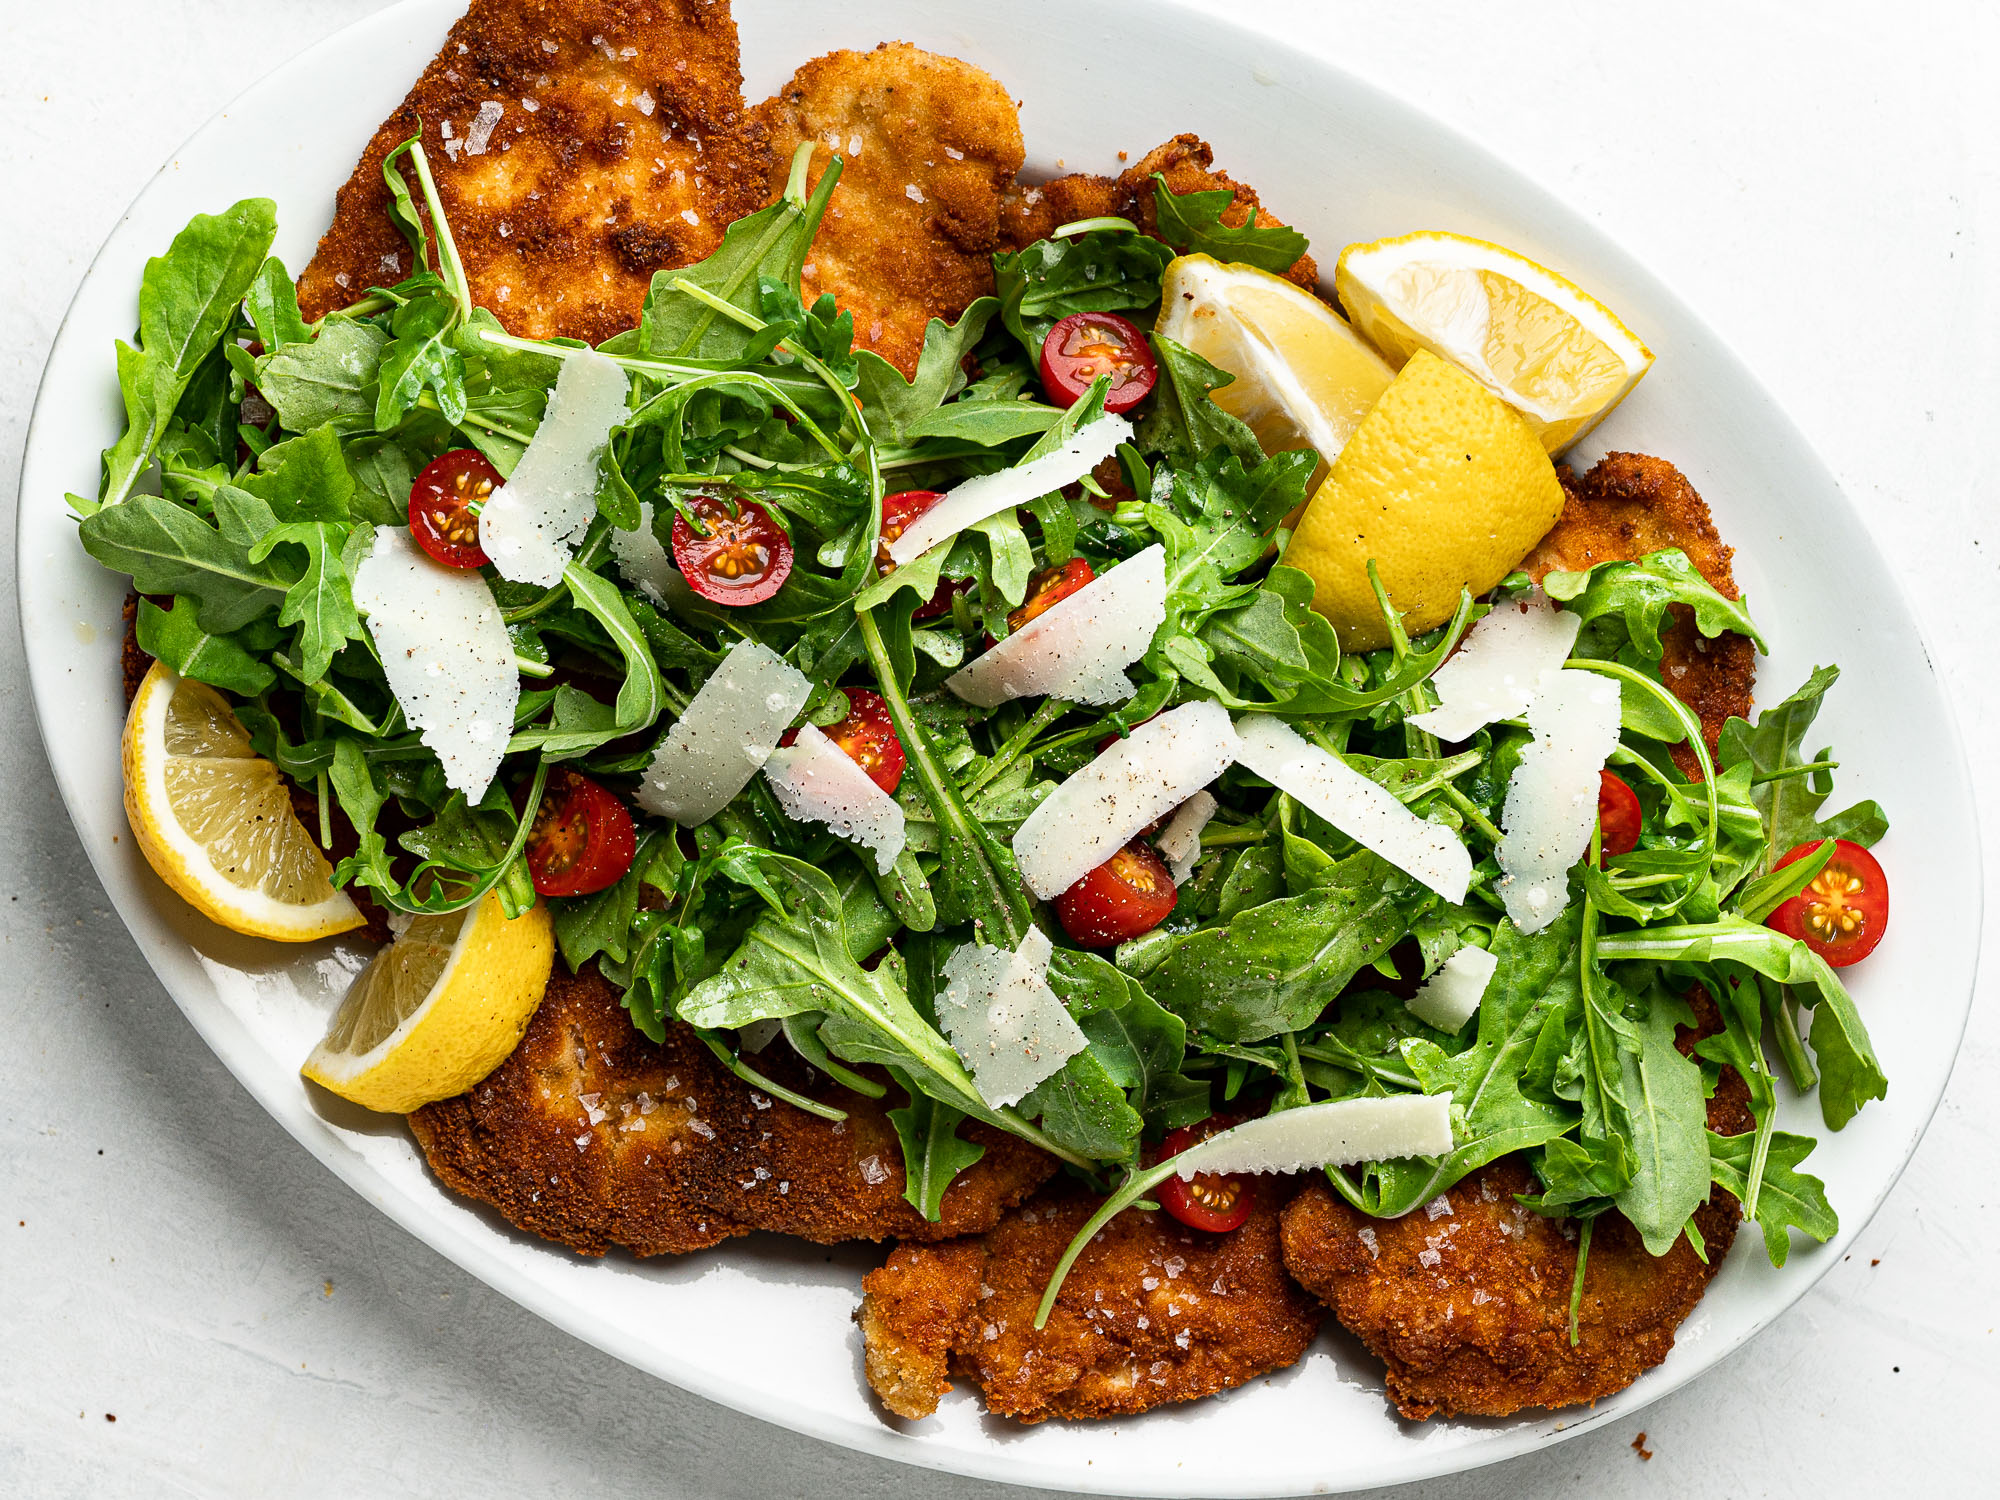 Chicken milanese served on platter topped with arugula salad